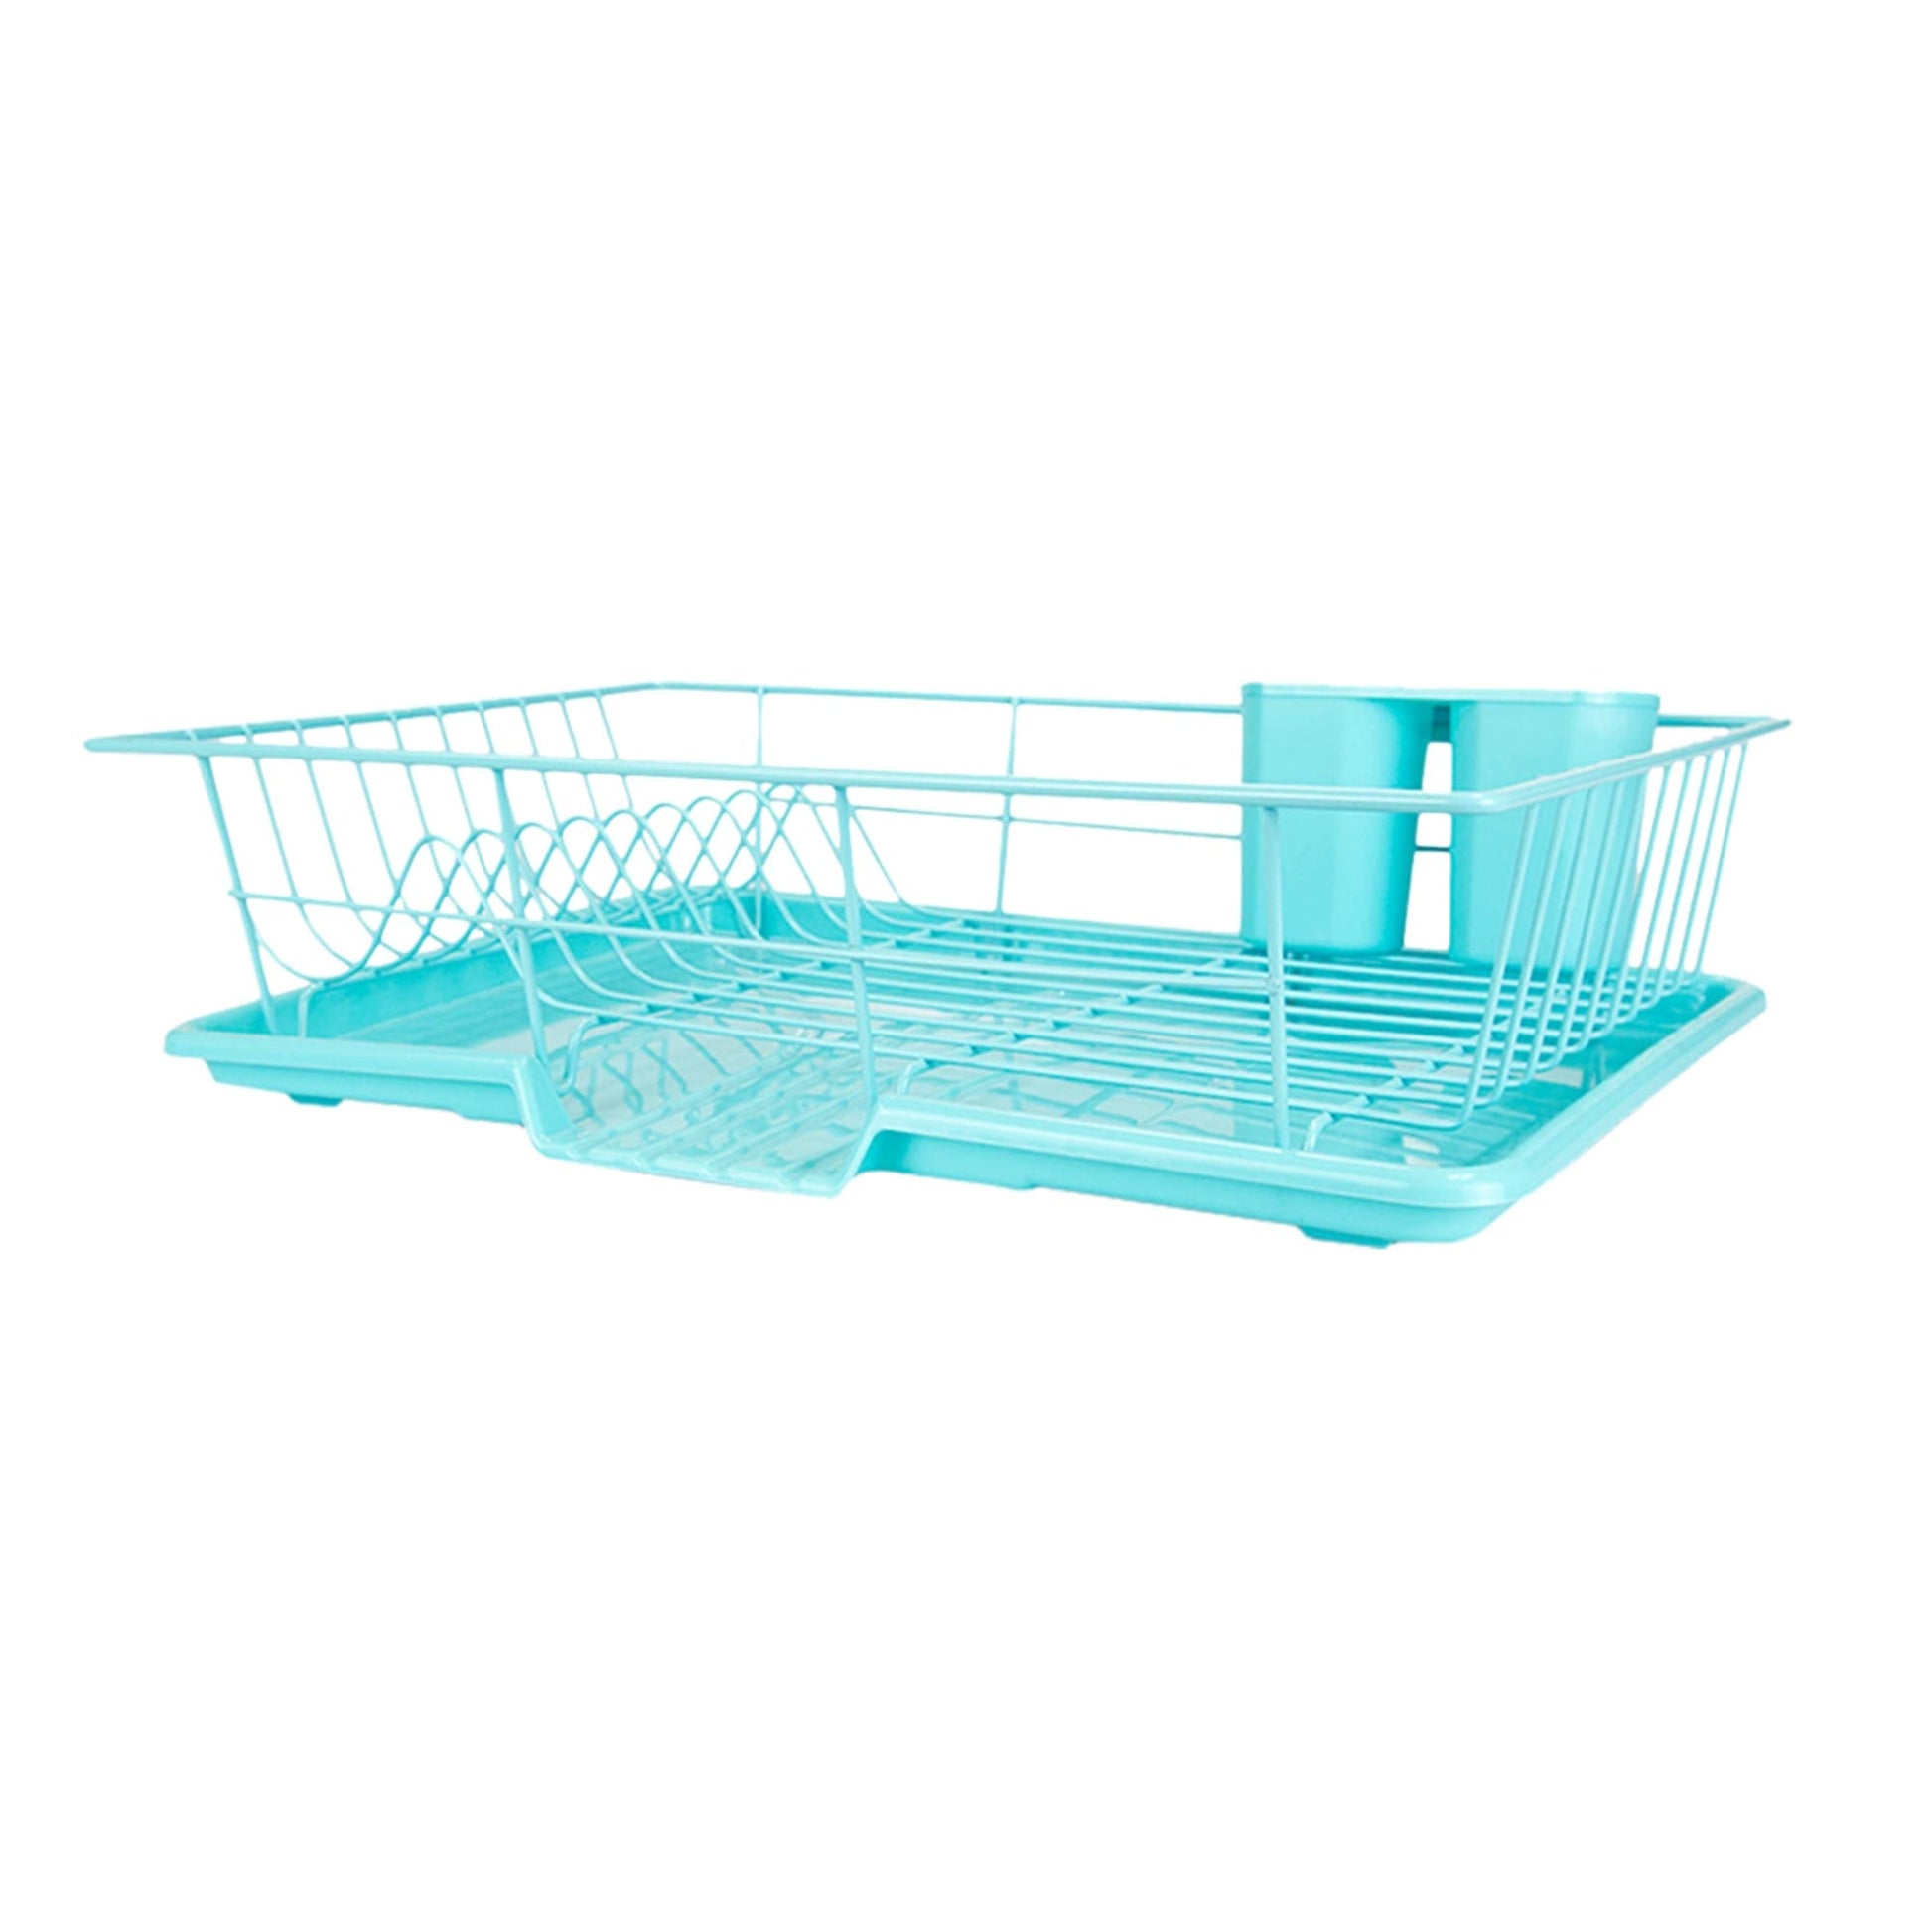 Chrome Plated Steel 2-Piece Small Dish Drainer - Turquoise